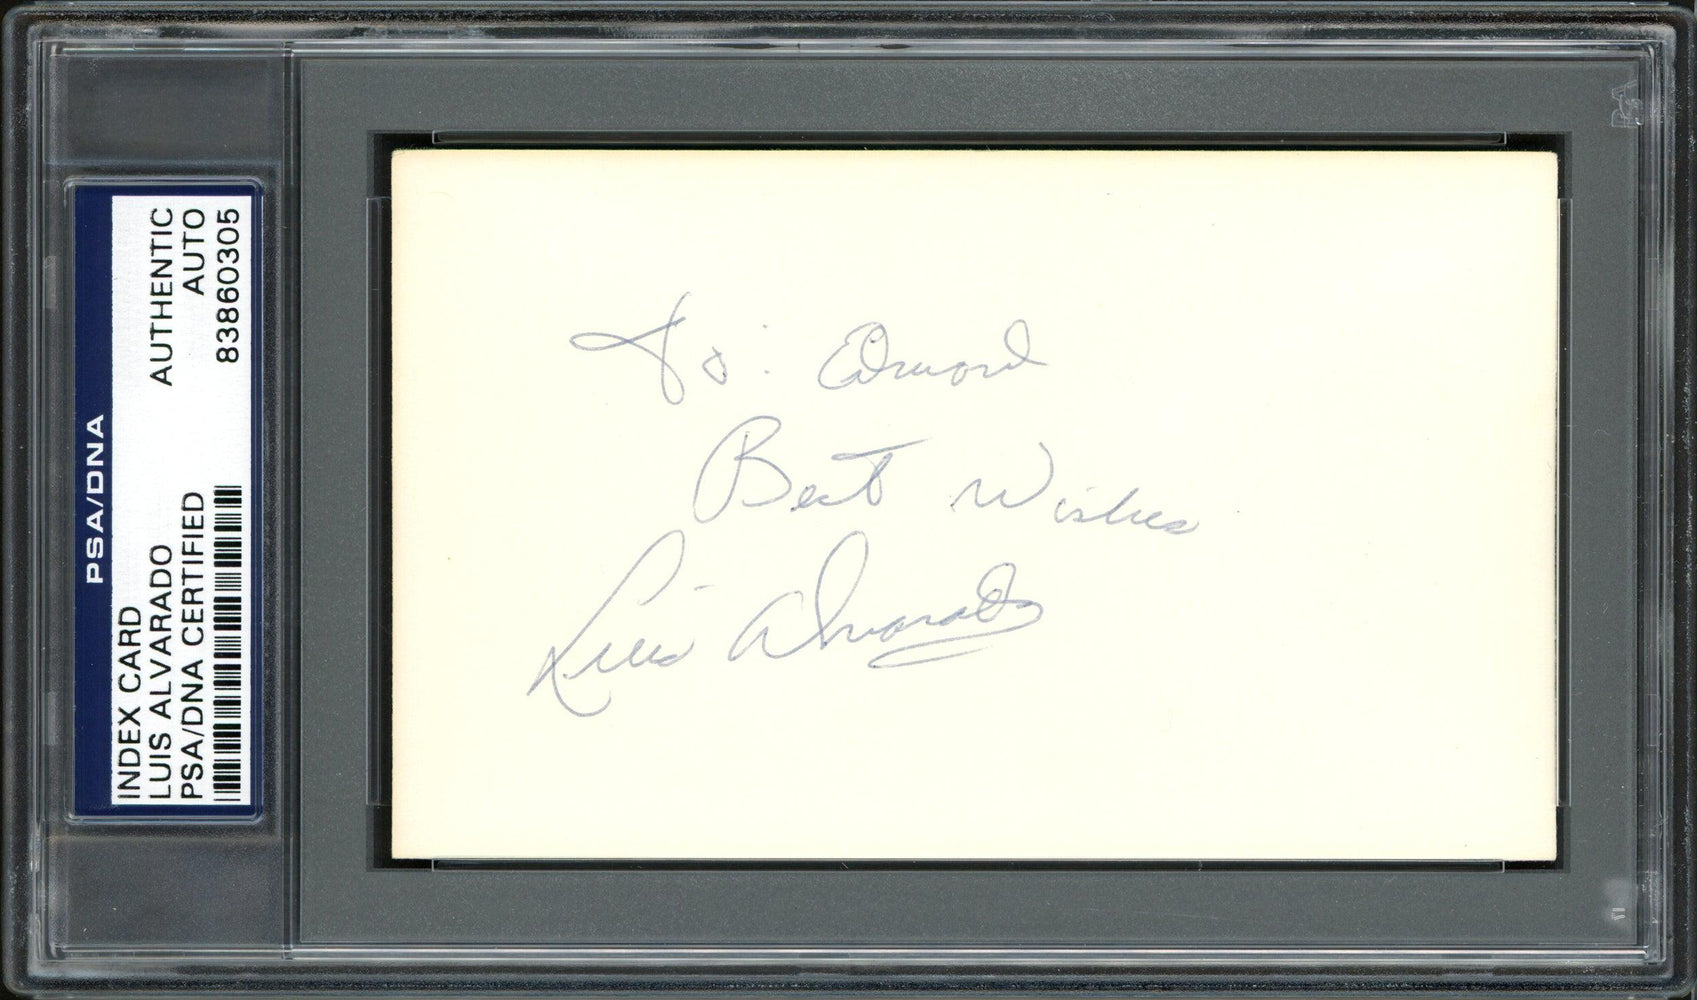 Luis Alvarado Autographed 3x5 Index Card Boston Red Sox, New York Mets "To Edward Best Wishes" PSA/DNA #83860305 - RSA